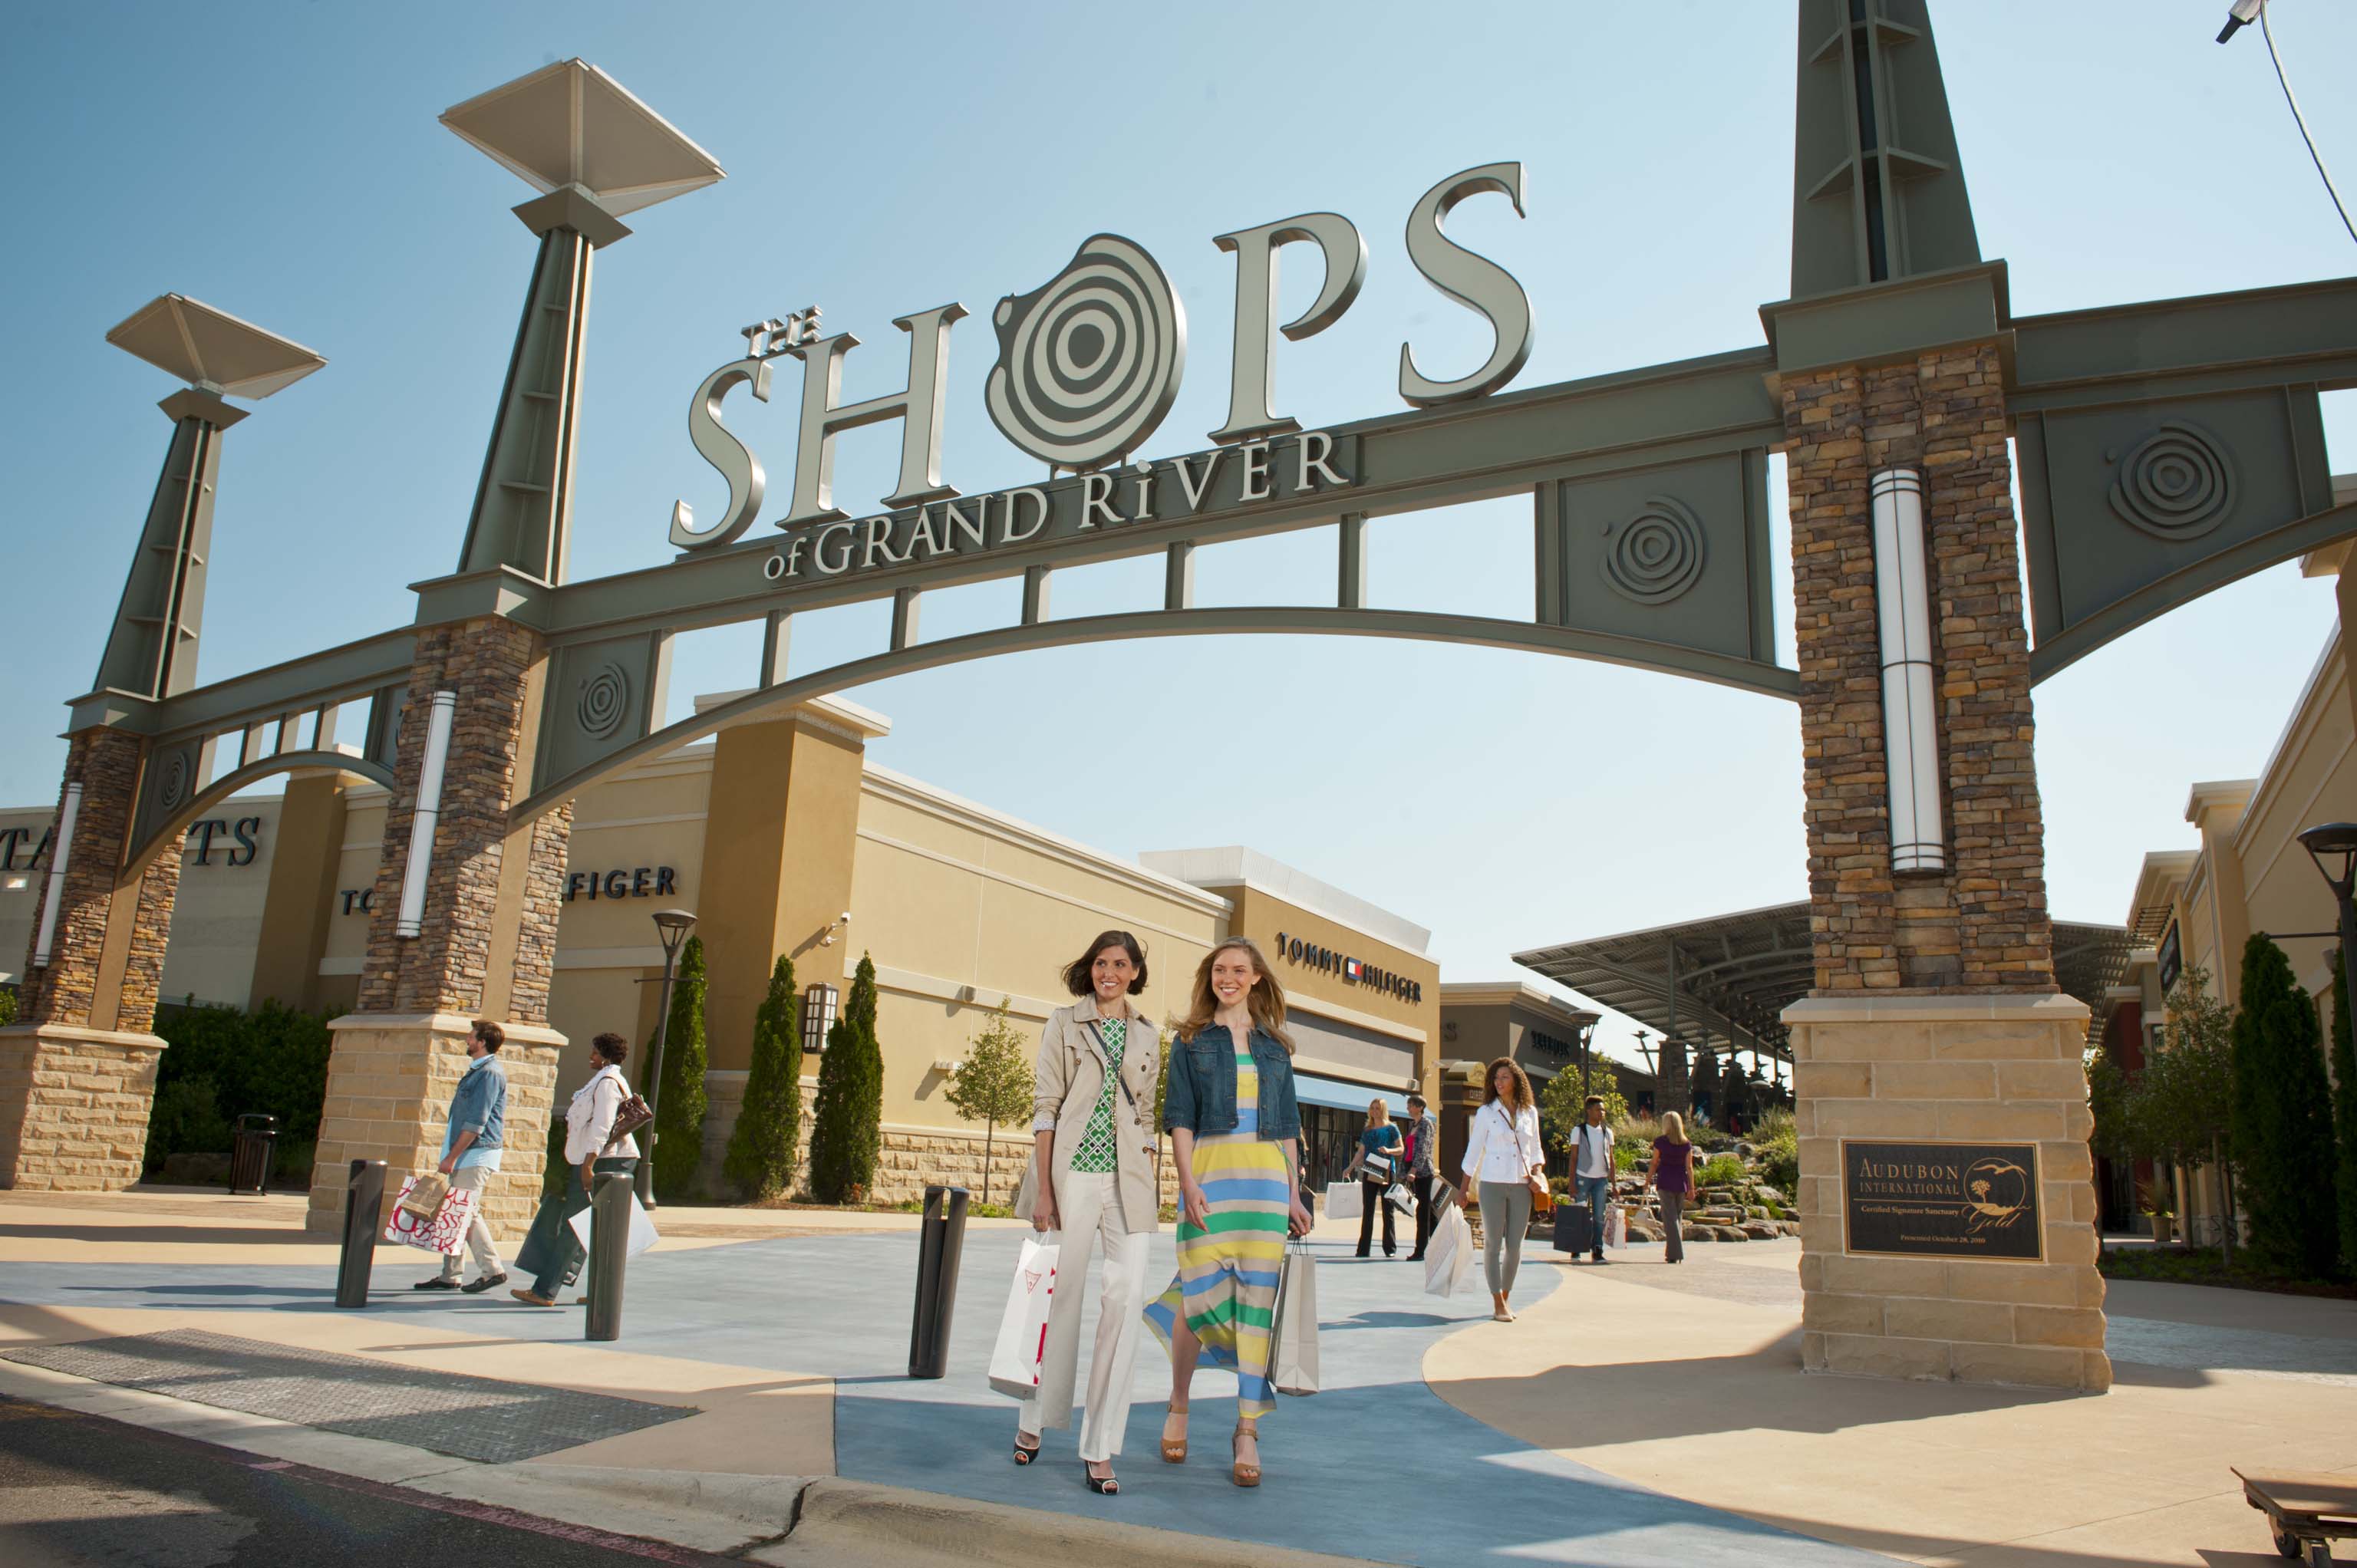 Outlet Malls in Alabama: The Outlet Shops of Grand River | OutletBound